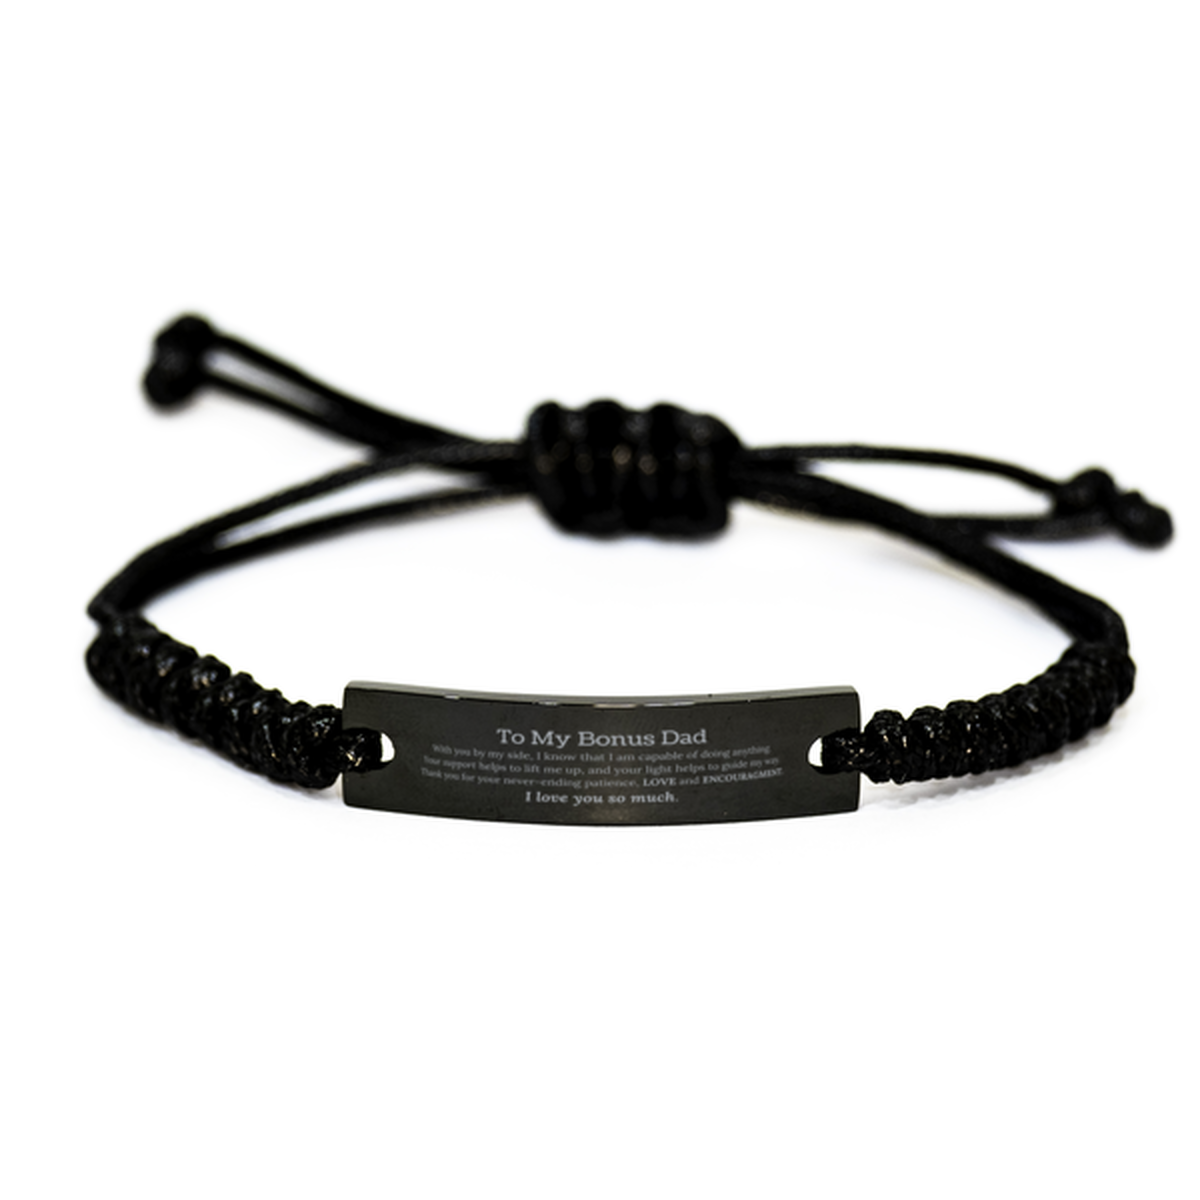 Appreciation Bonus Dad Black Rope Bracelet Gifts, To My Bonus Dad Birthday Christmas Wedding Keepsake Gifts for Bonus Dad With you by my side, I know that I am capable of doing anything. I love you so much